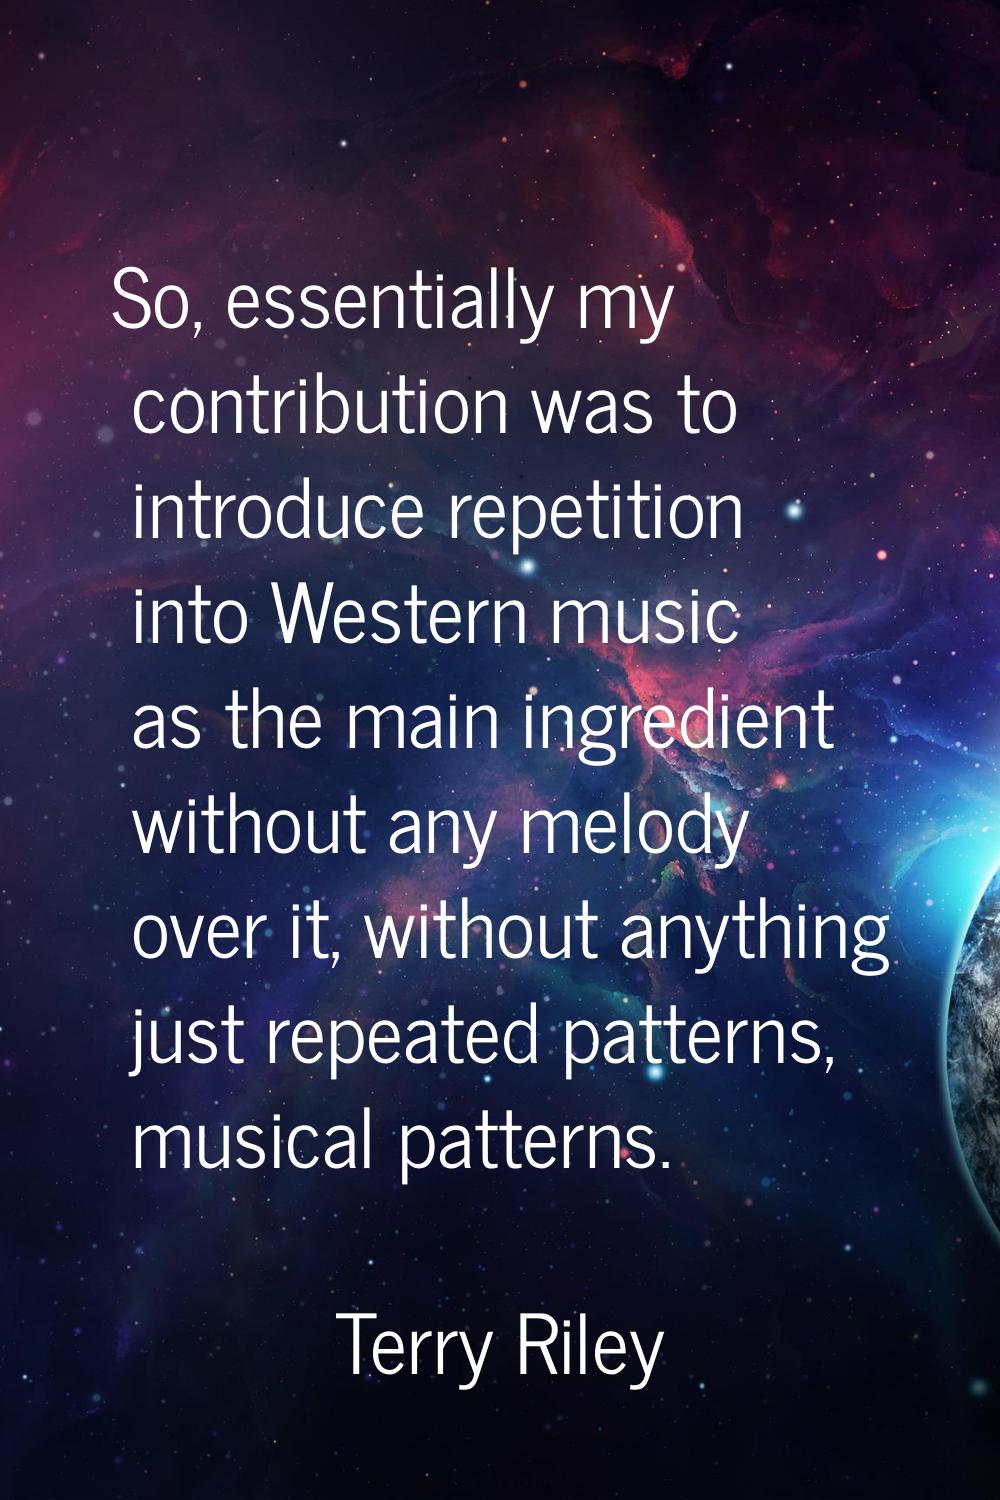 So, essentially my contribution was to introduce repetition into Western music as the main ingredie